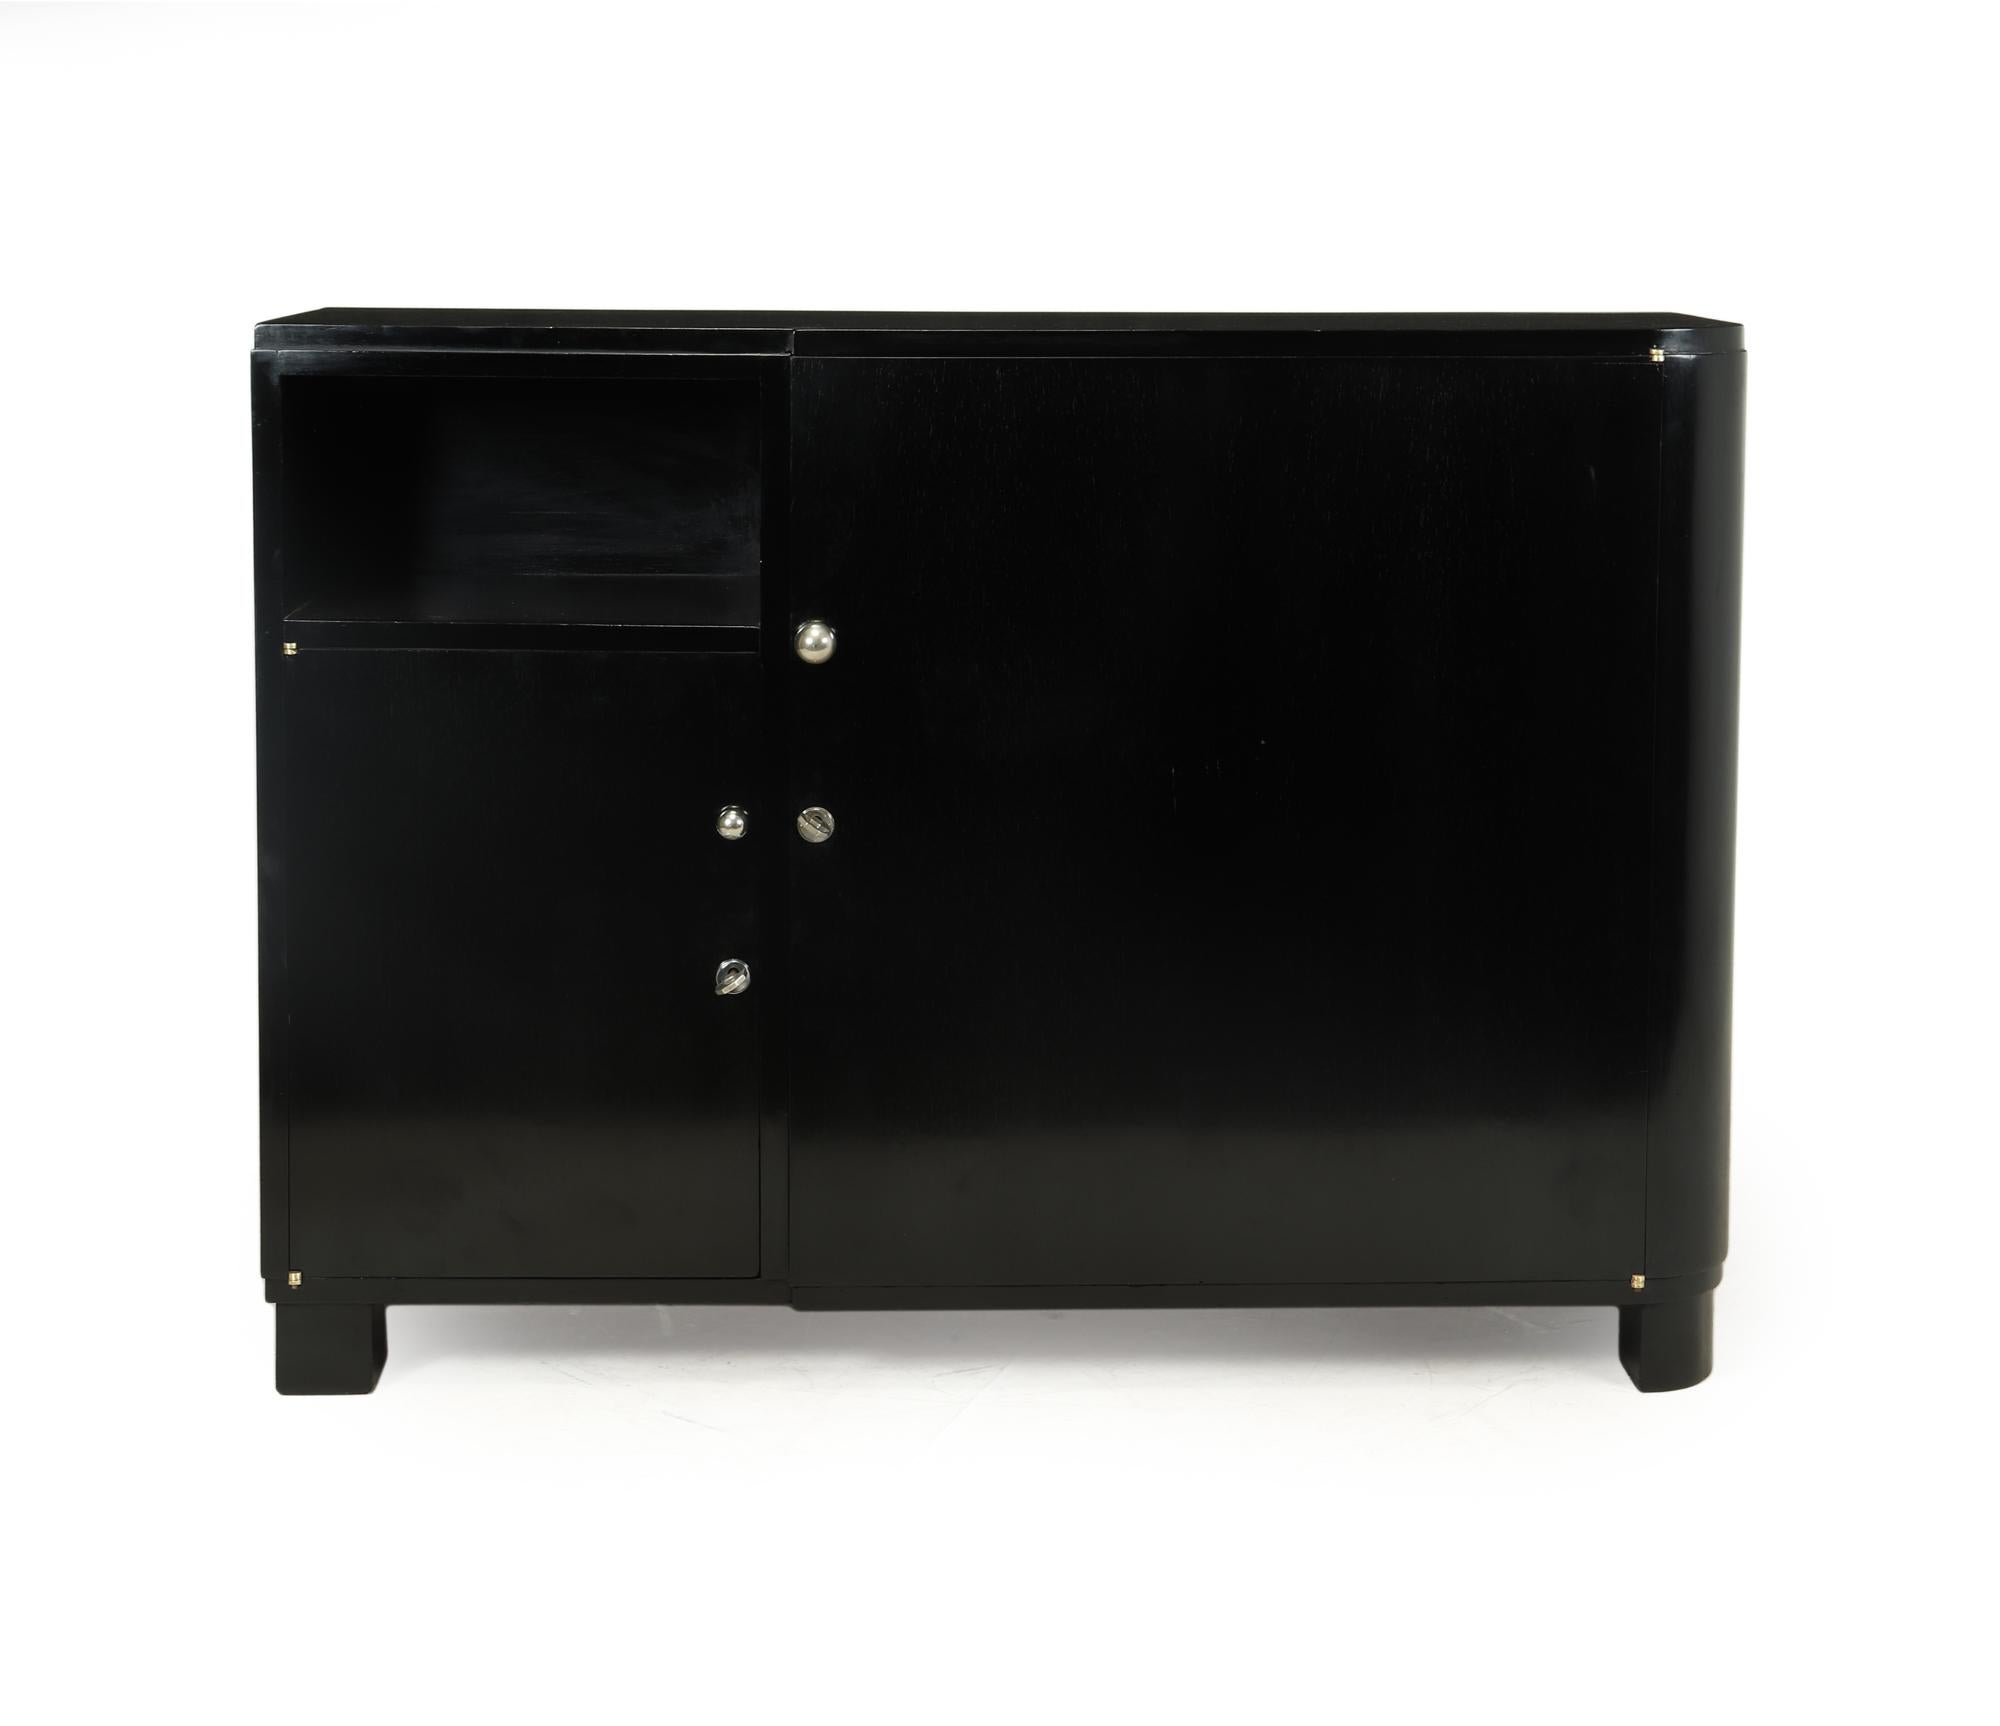 French Art Deco Piano Black Lacquer Sideboard, c1930